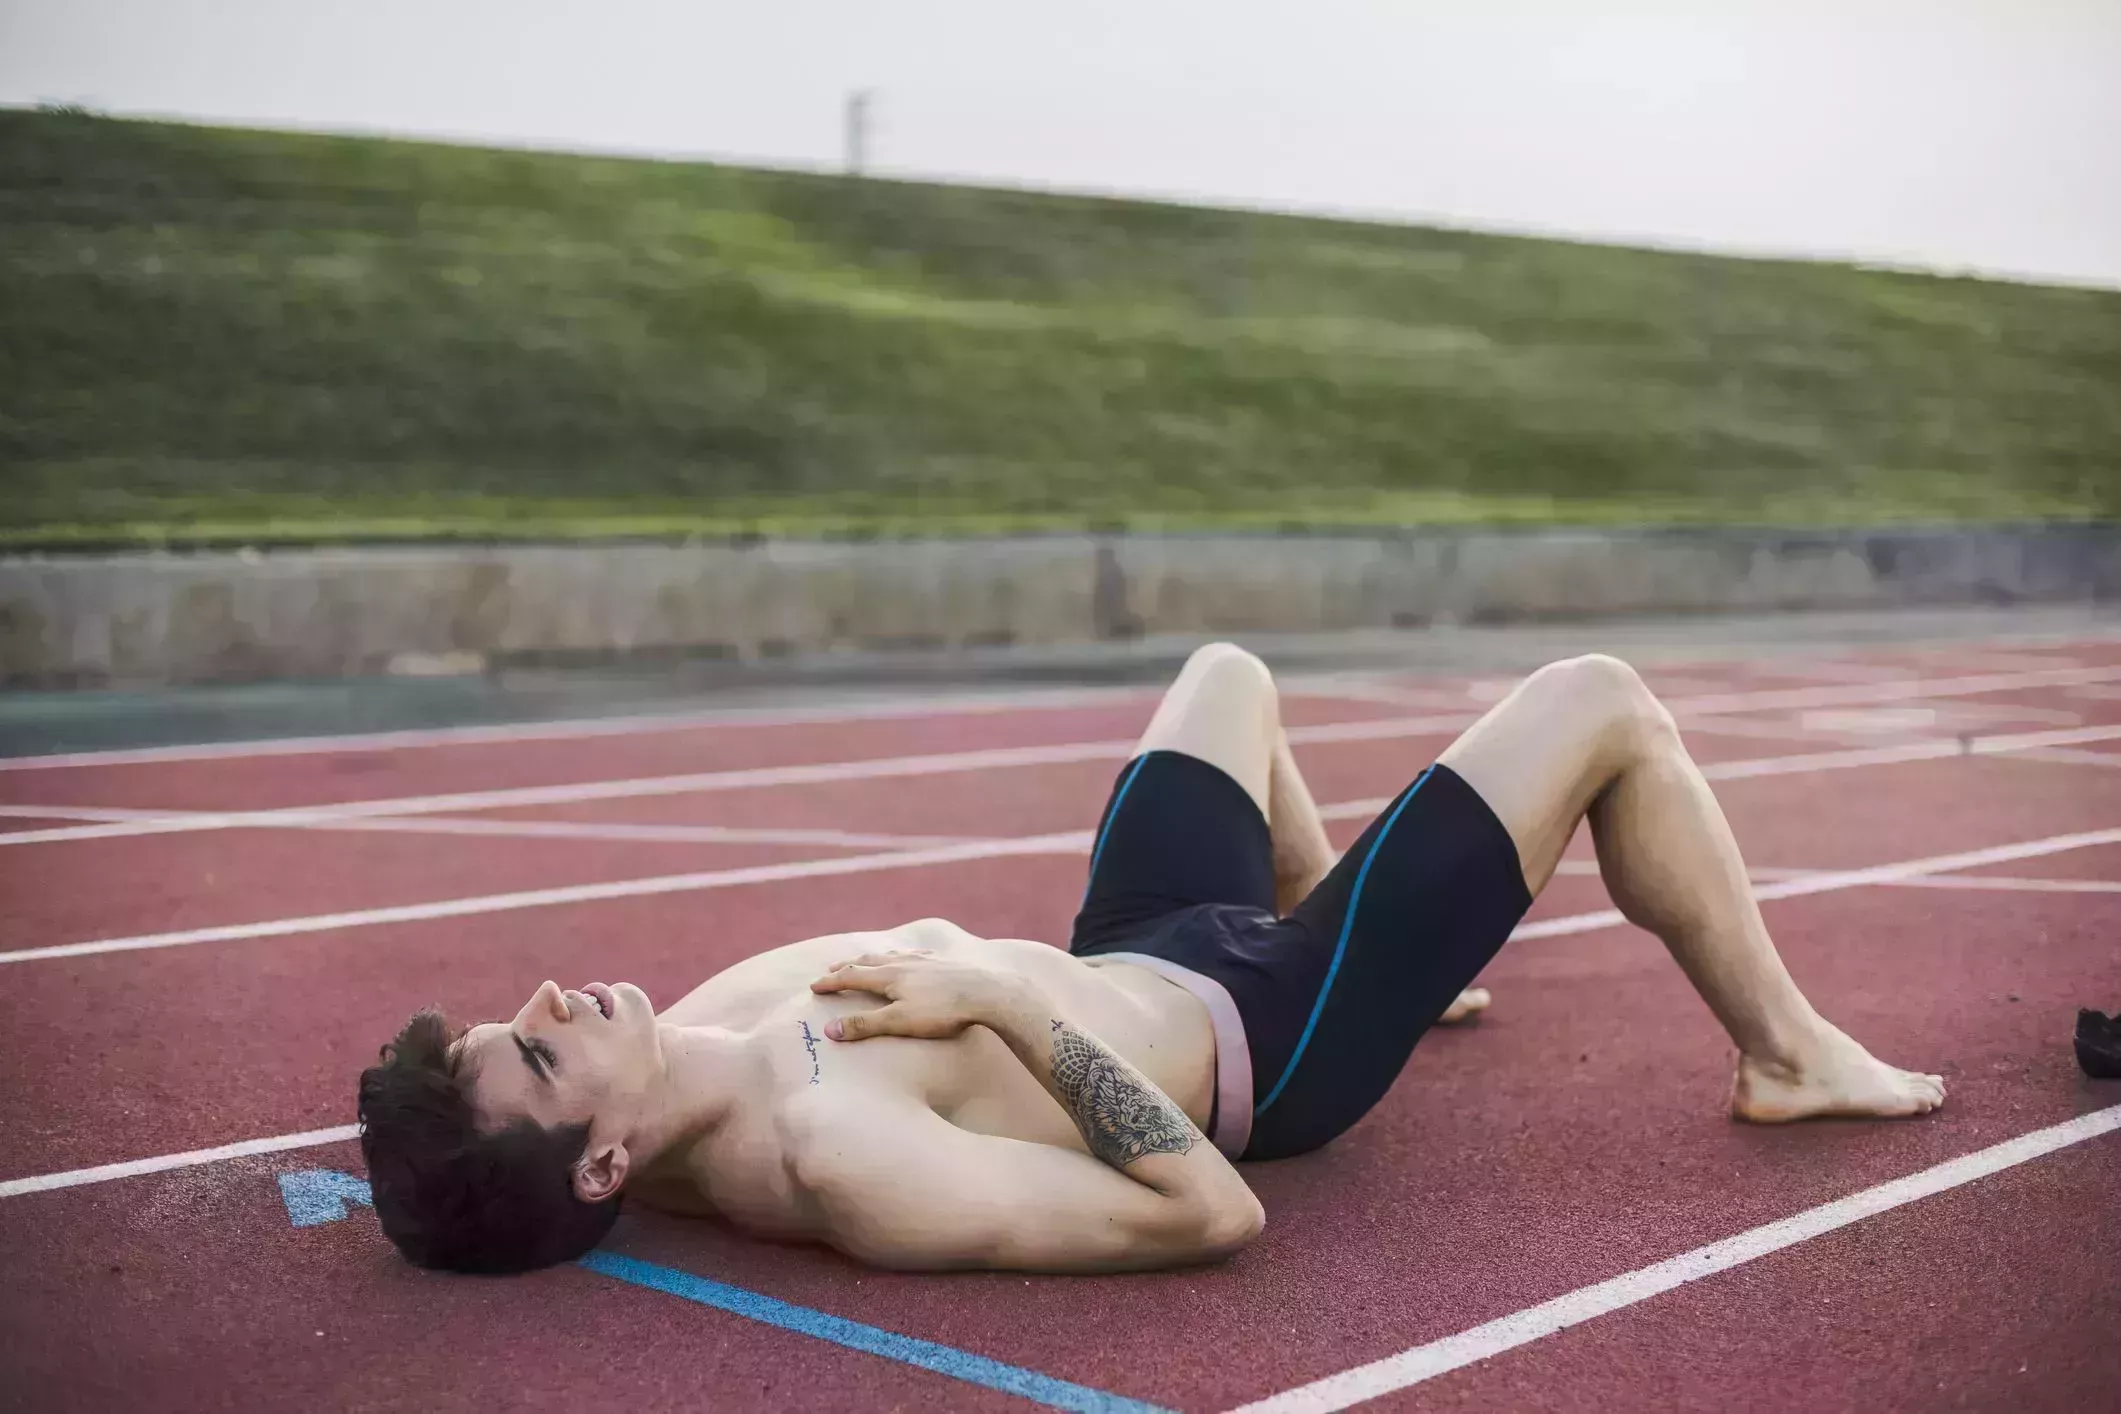 athlete lying resting on a tartan track after finishing a race